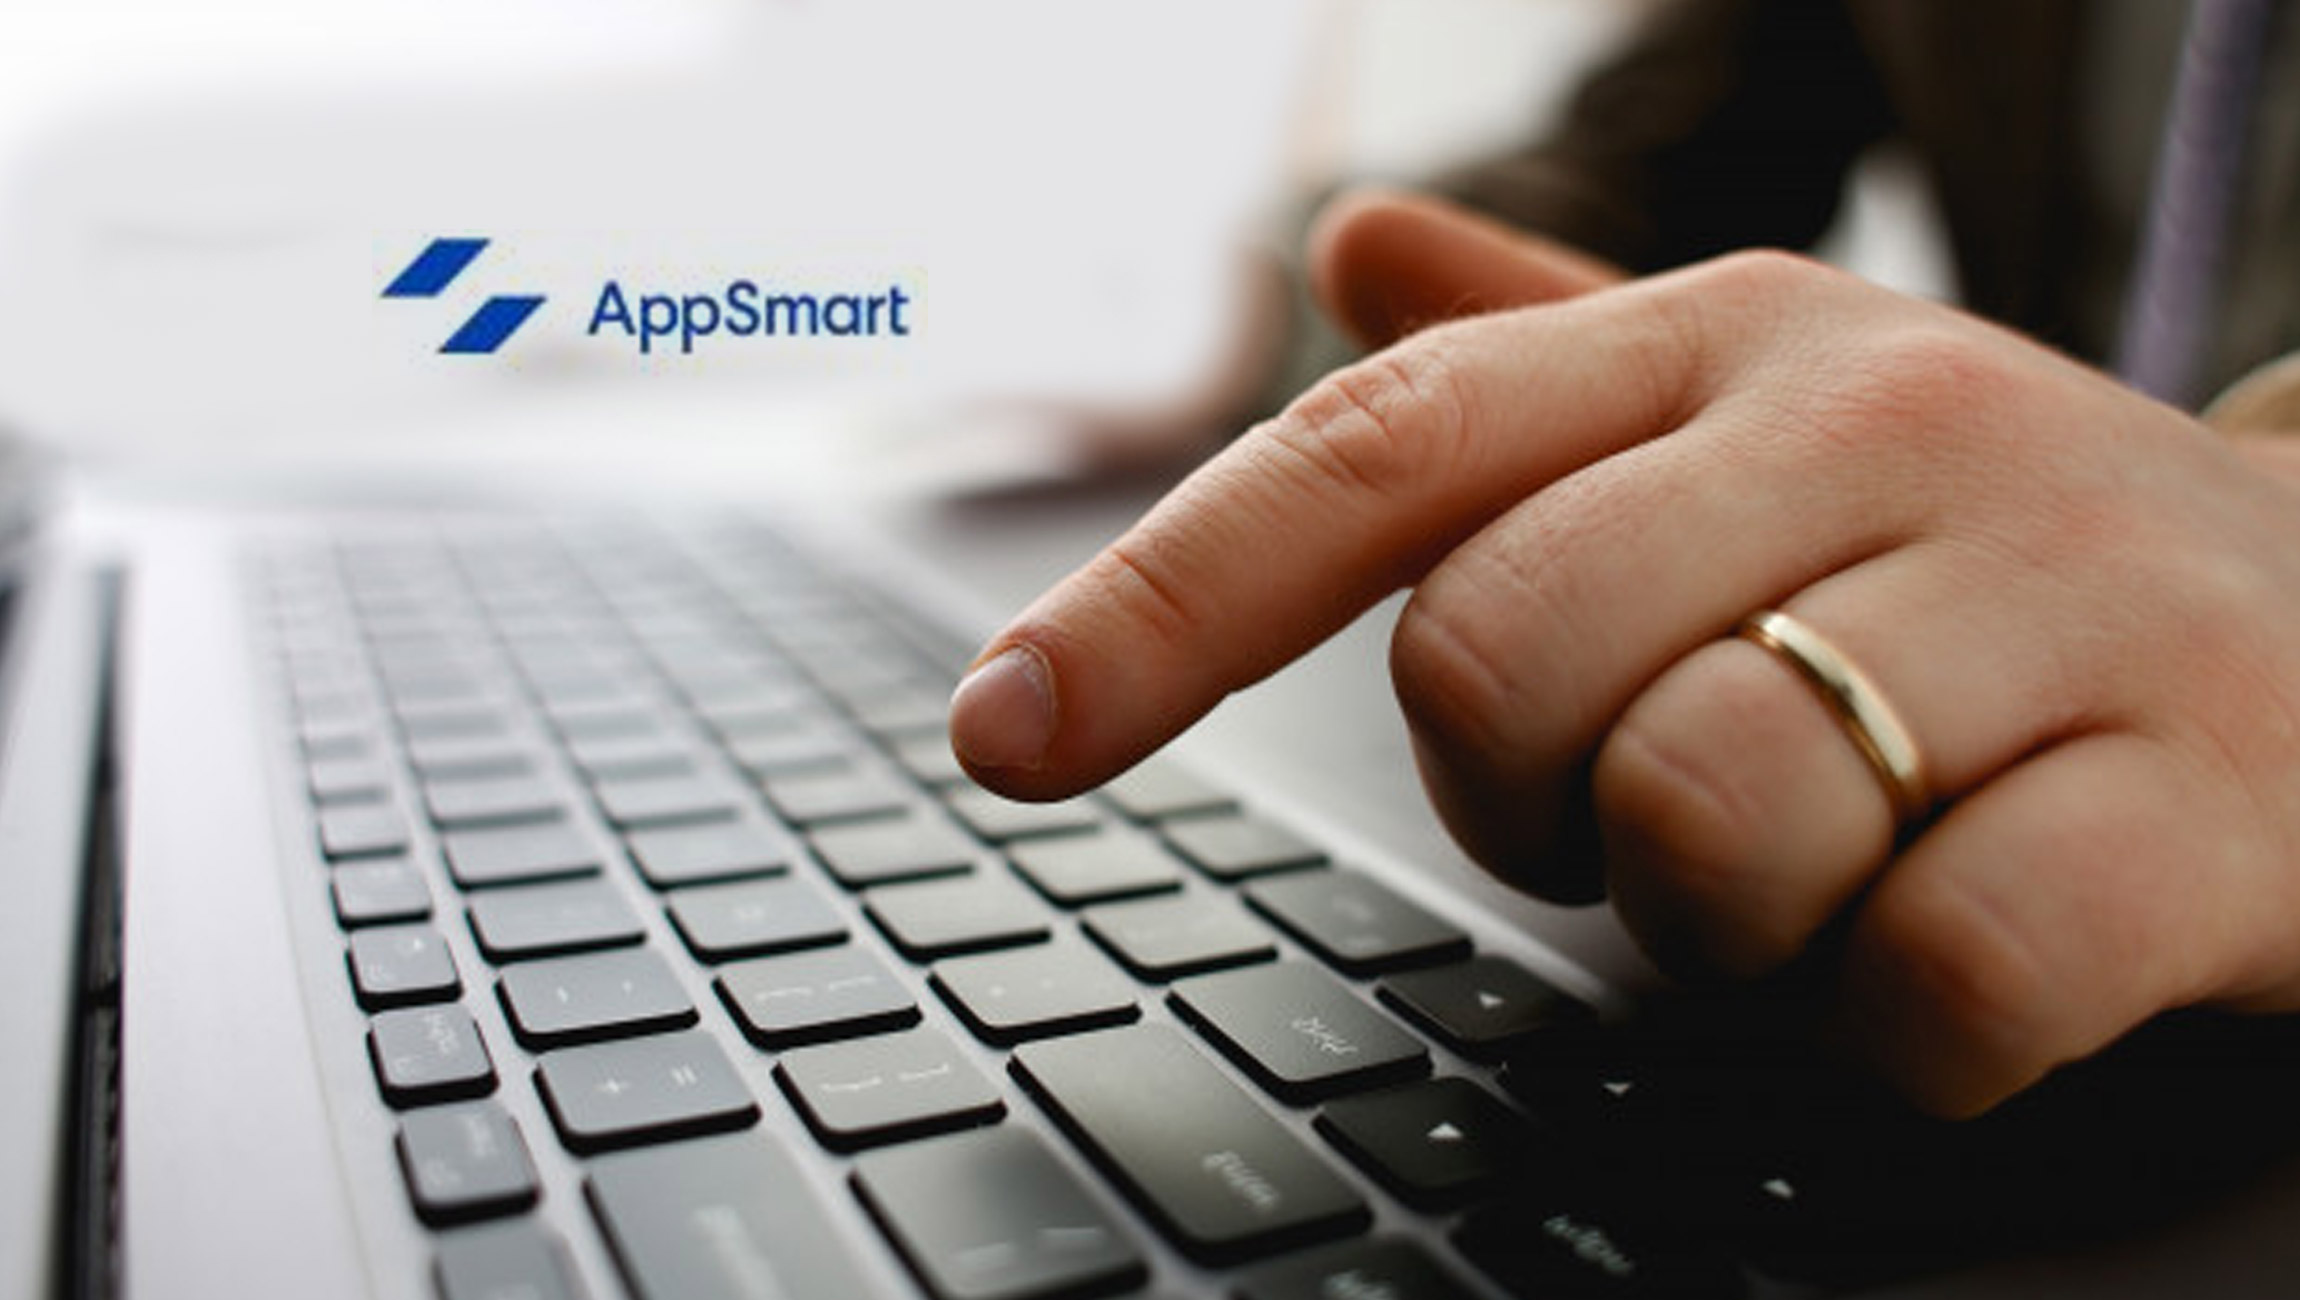 AppSmart Expands Leadership Team to Drive Next Phase of Growth